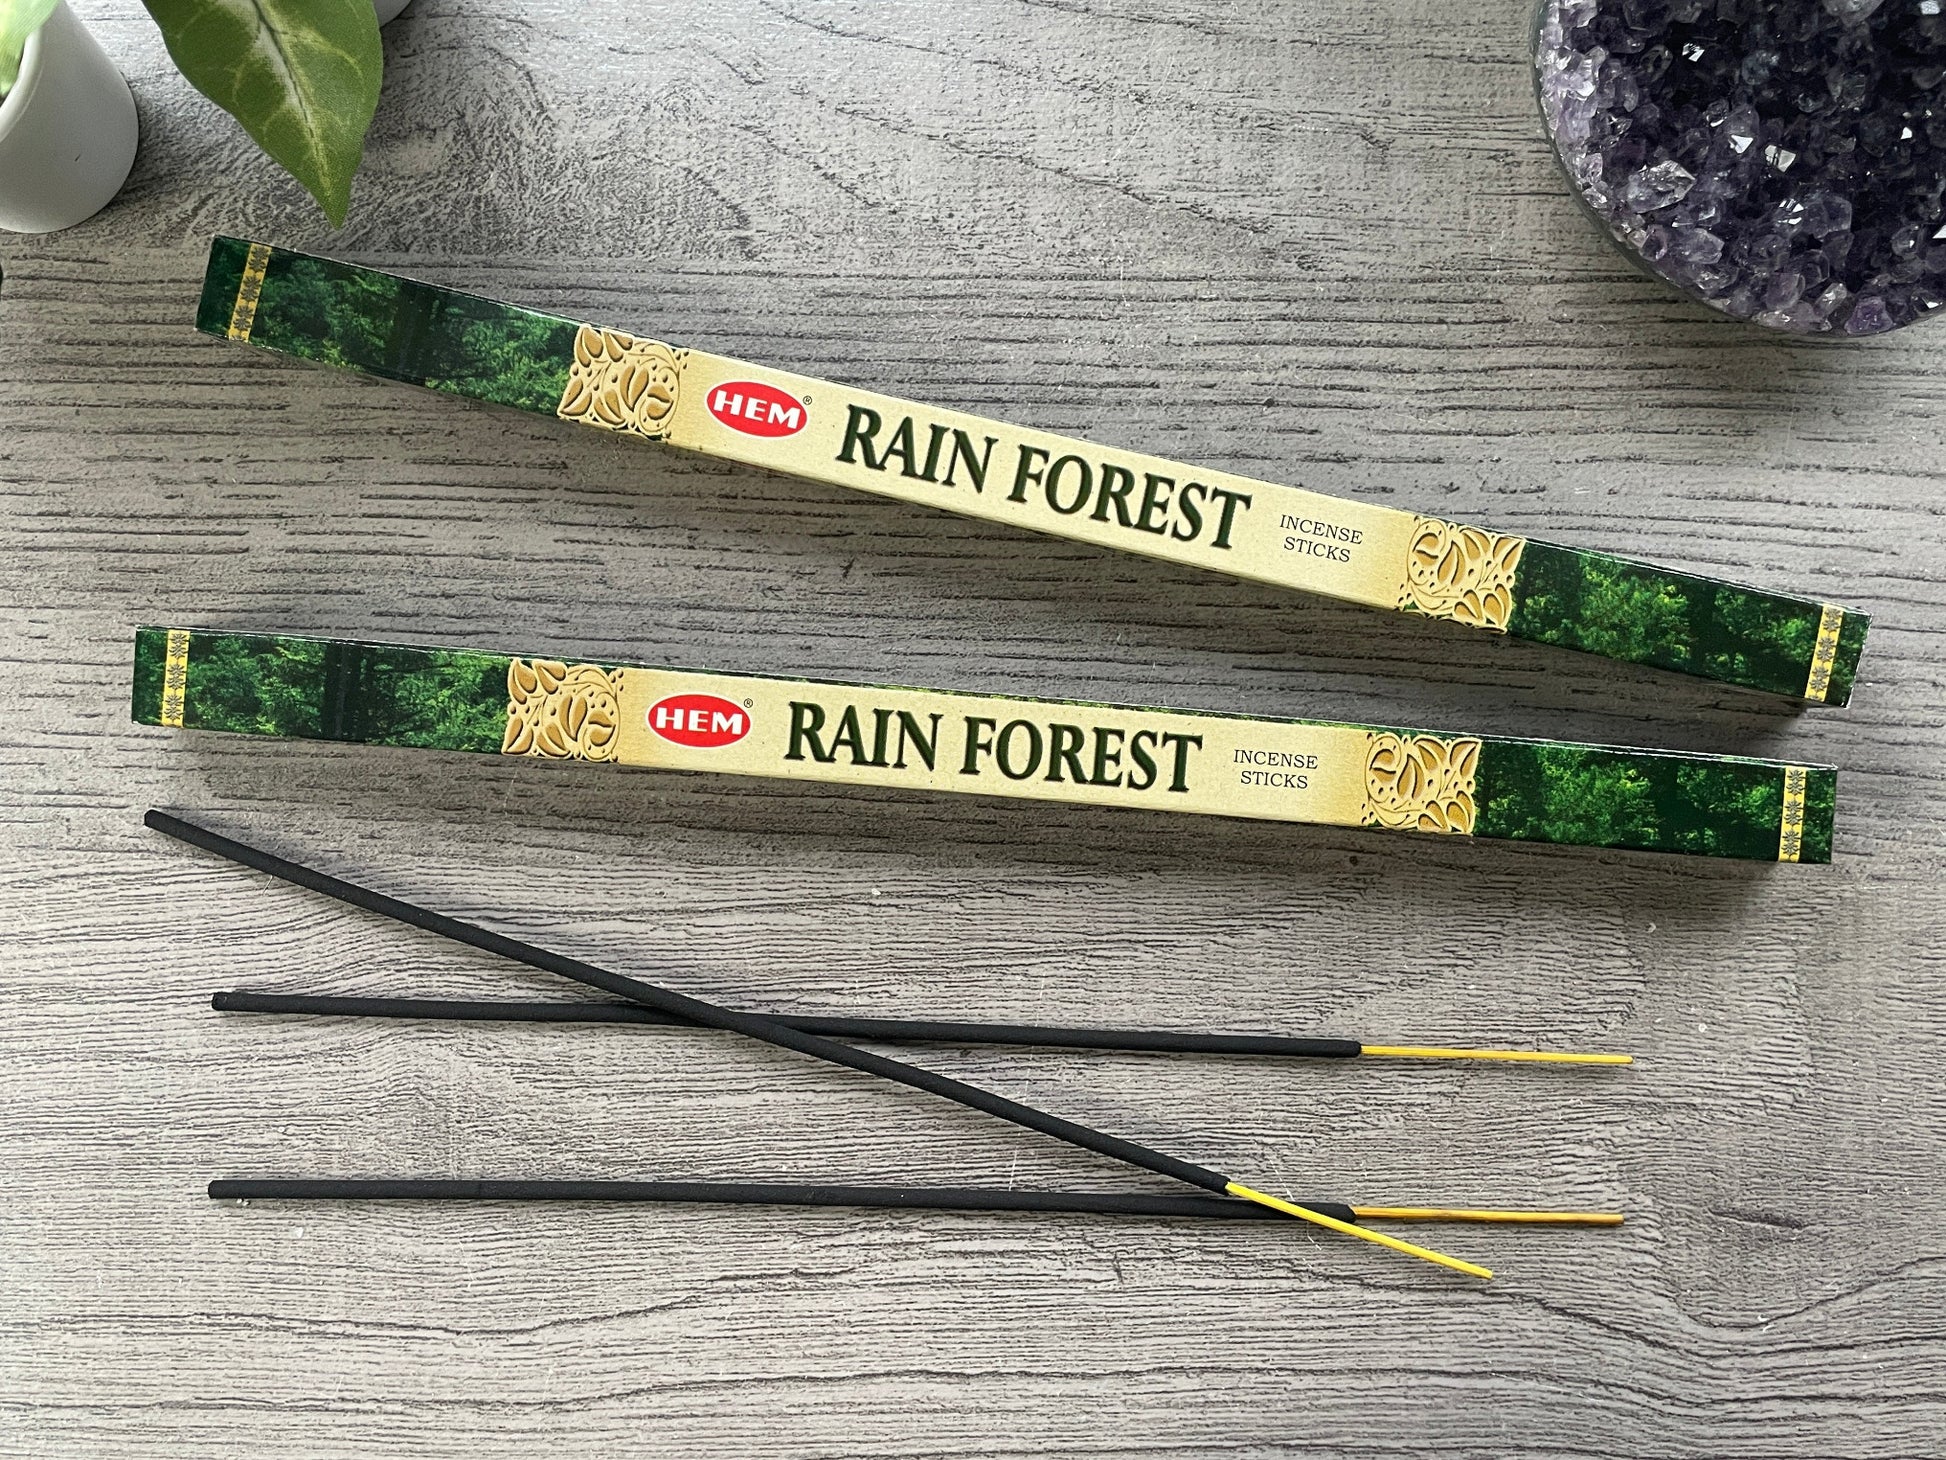 Pictured is a box of rain forest incense.